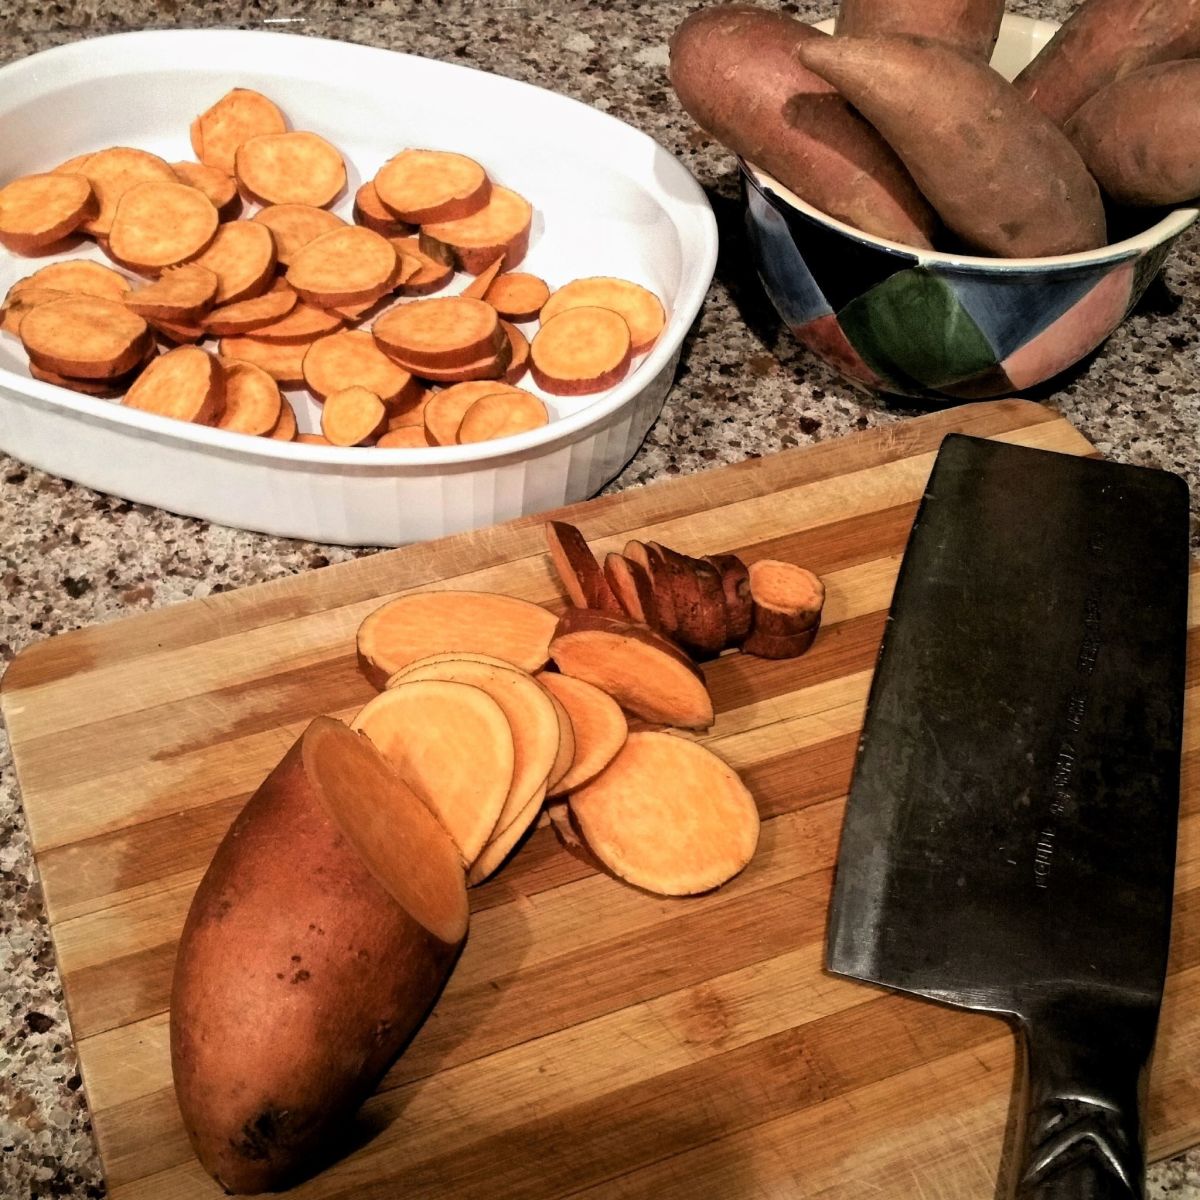 Slice the yams as thinly as possible. 